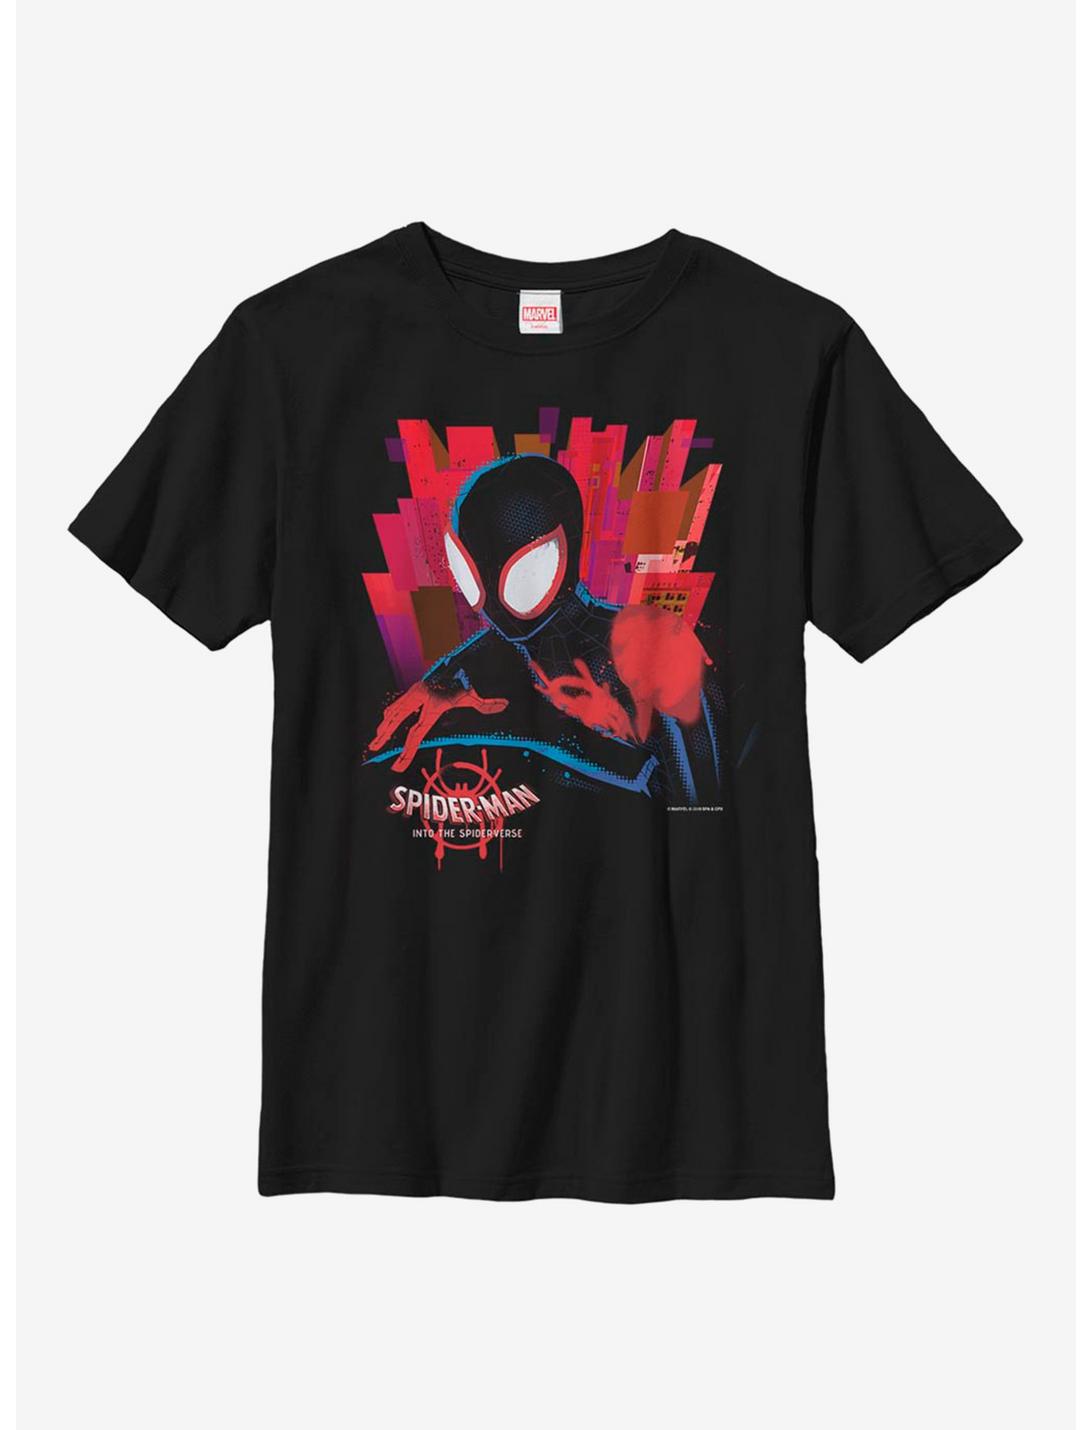 Marvel Spider-Man: Into The Spiderverse Morales Youth T-Shirt, BLACK, hi-res